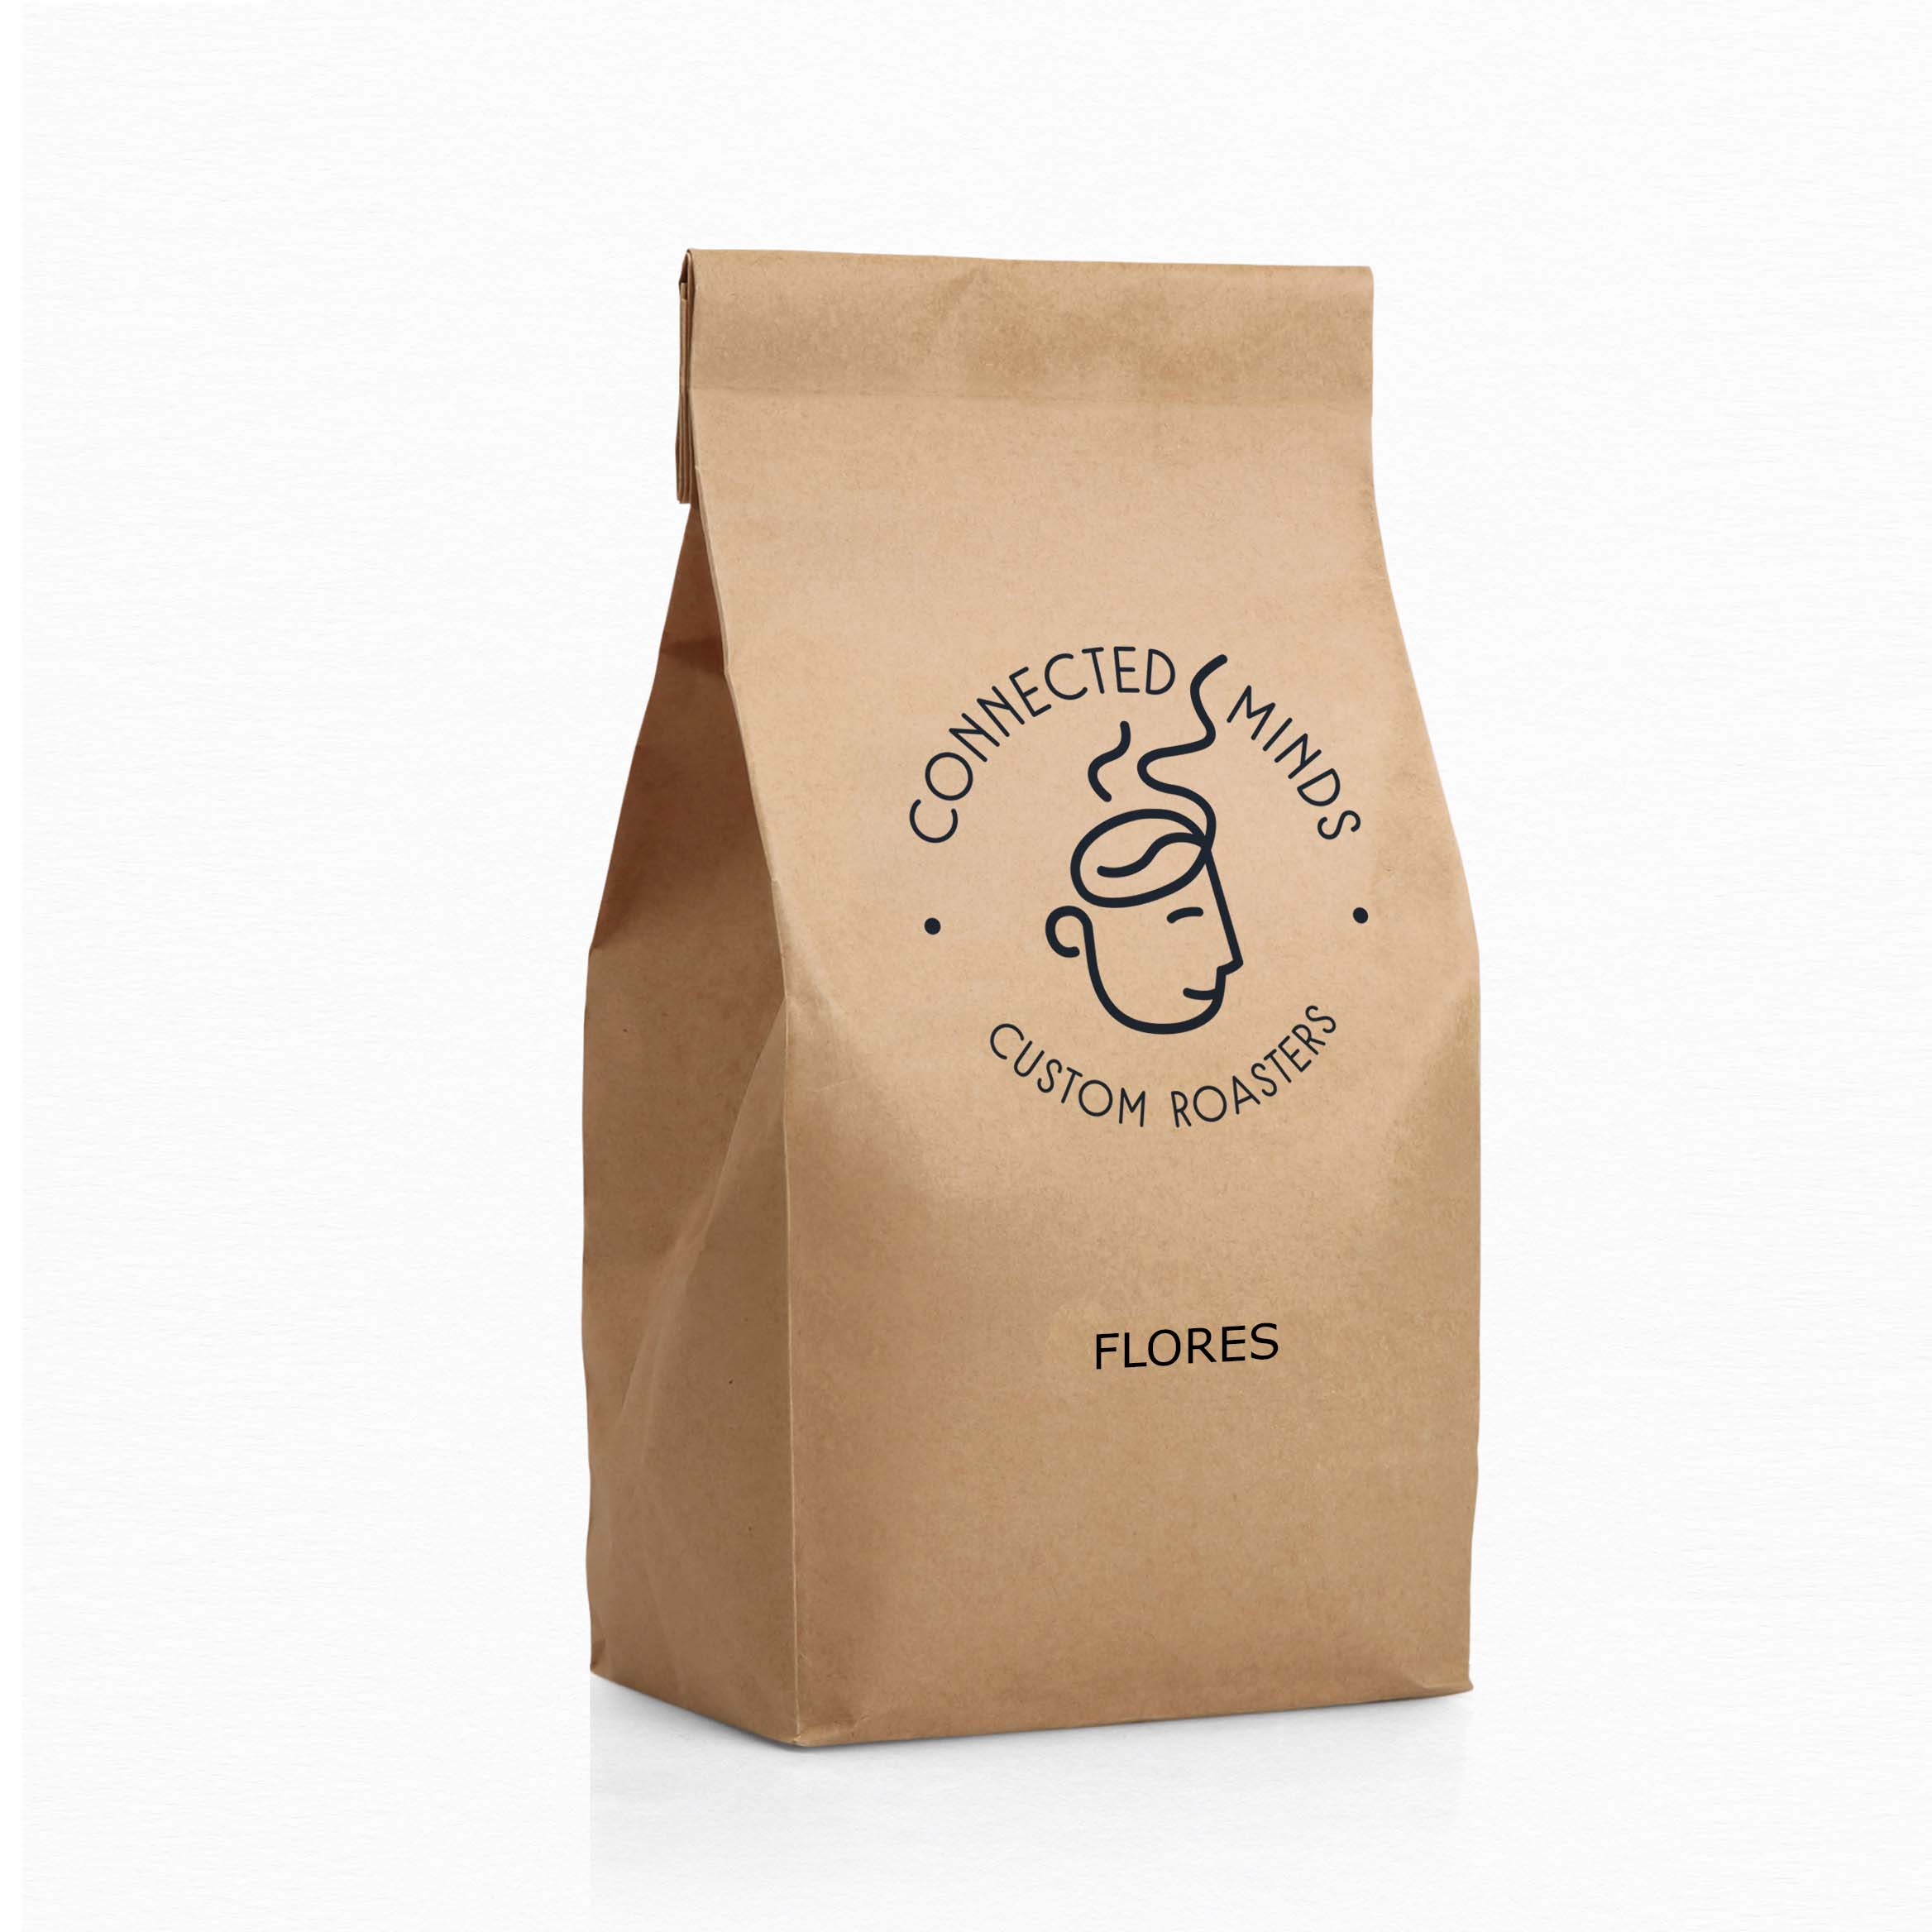 Roaster's Choice Dark Flores Coffee (Great for a drip or french press, A bolder choice!)